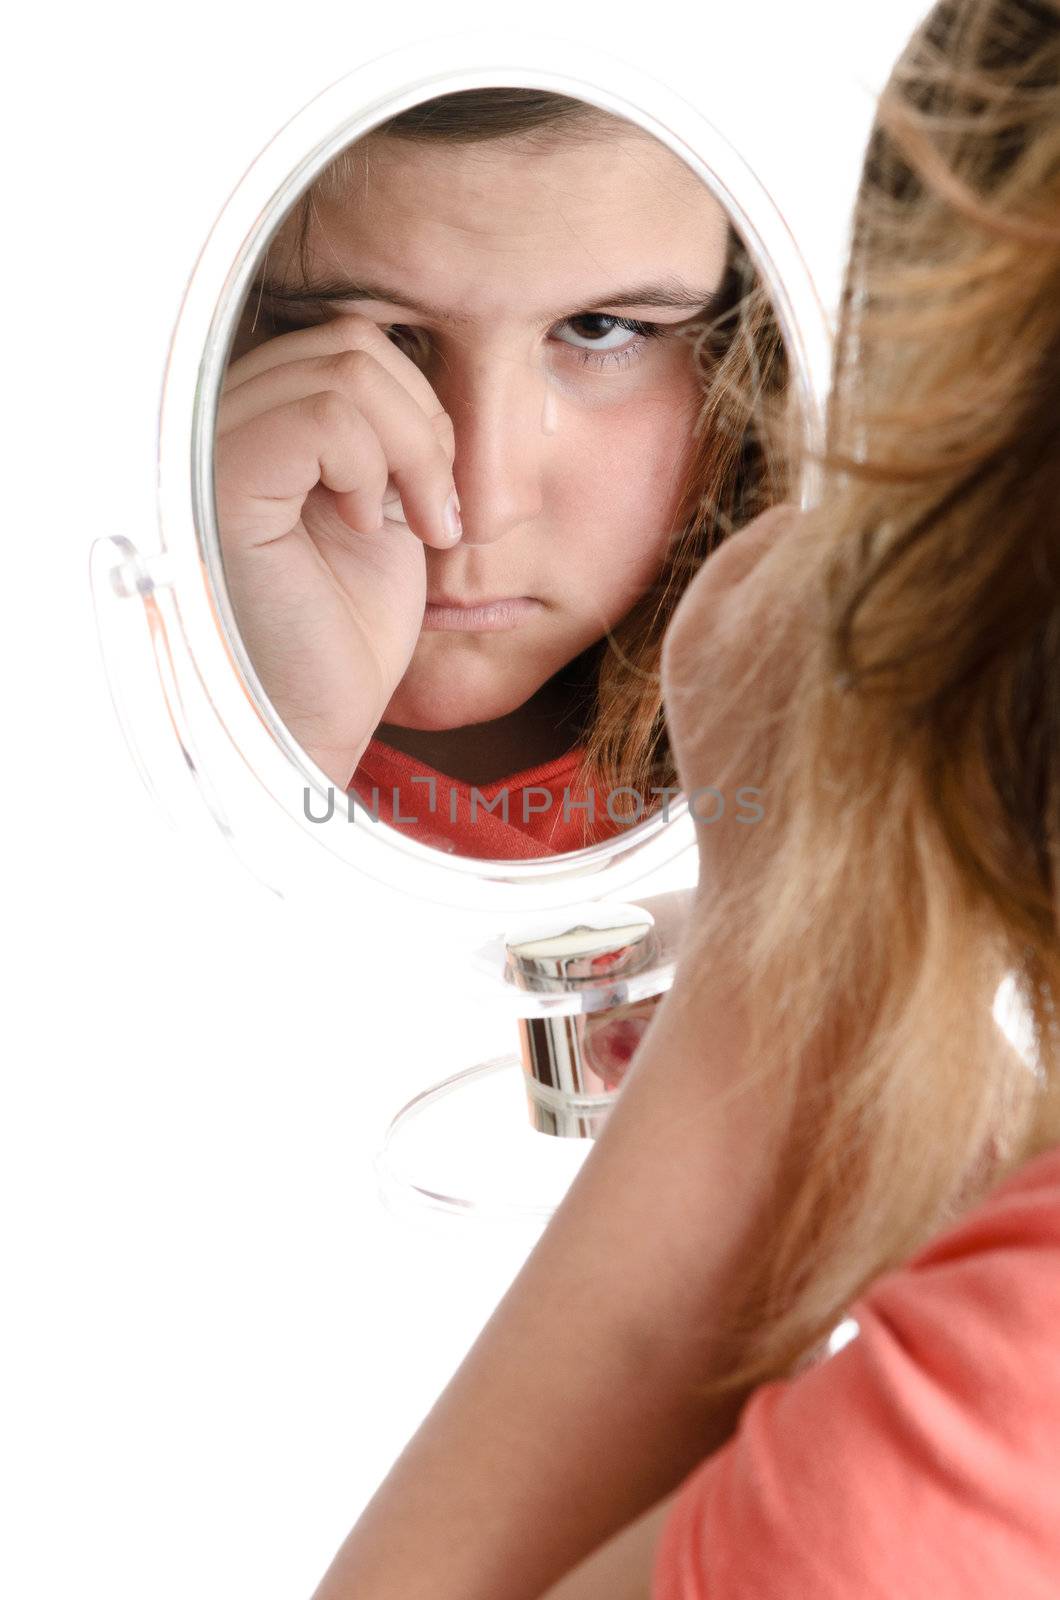 A sad girl is crying while looking at the viewer in a mirror, isolated against a white background.